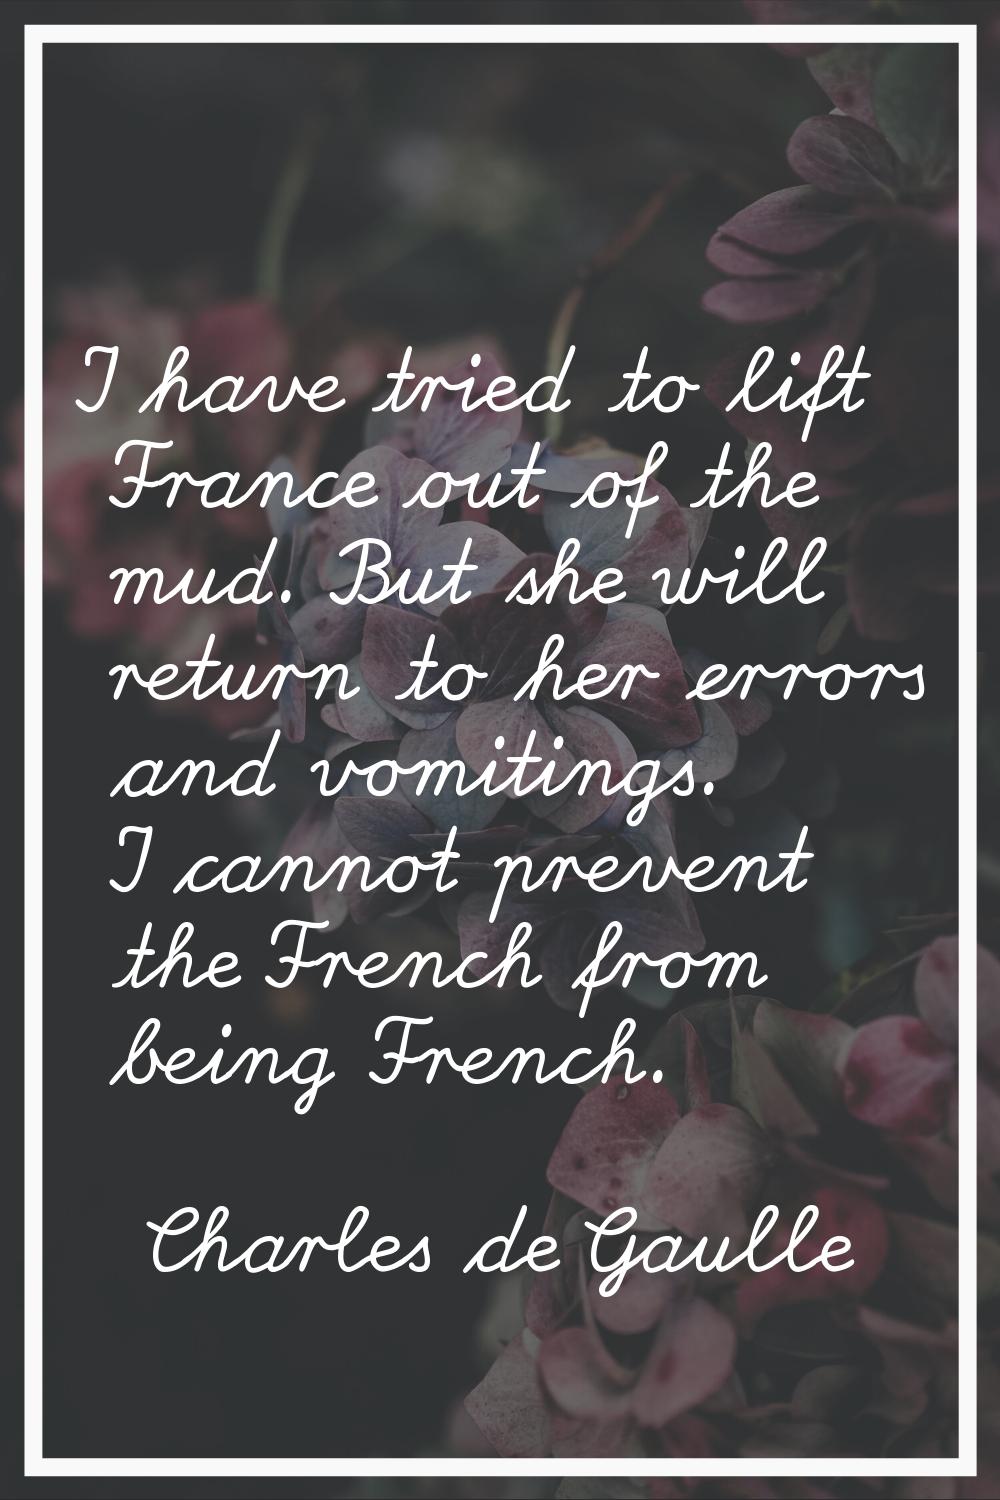 I have tried to lift France out of the mud. But she will return to her errors and vomitings. I cann